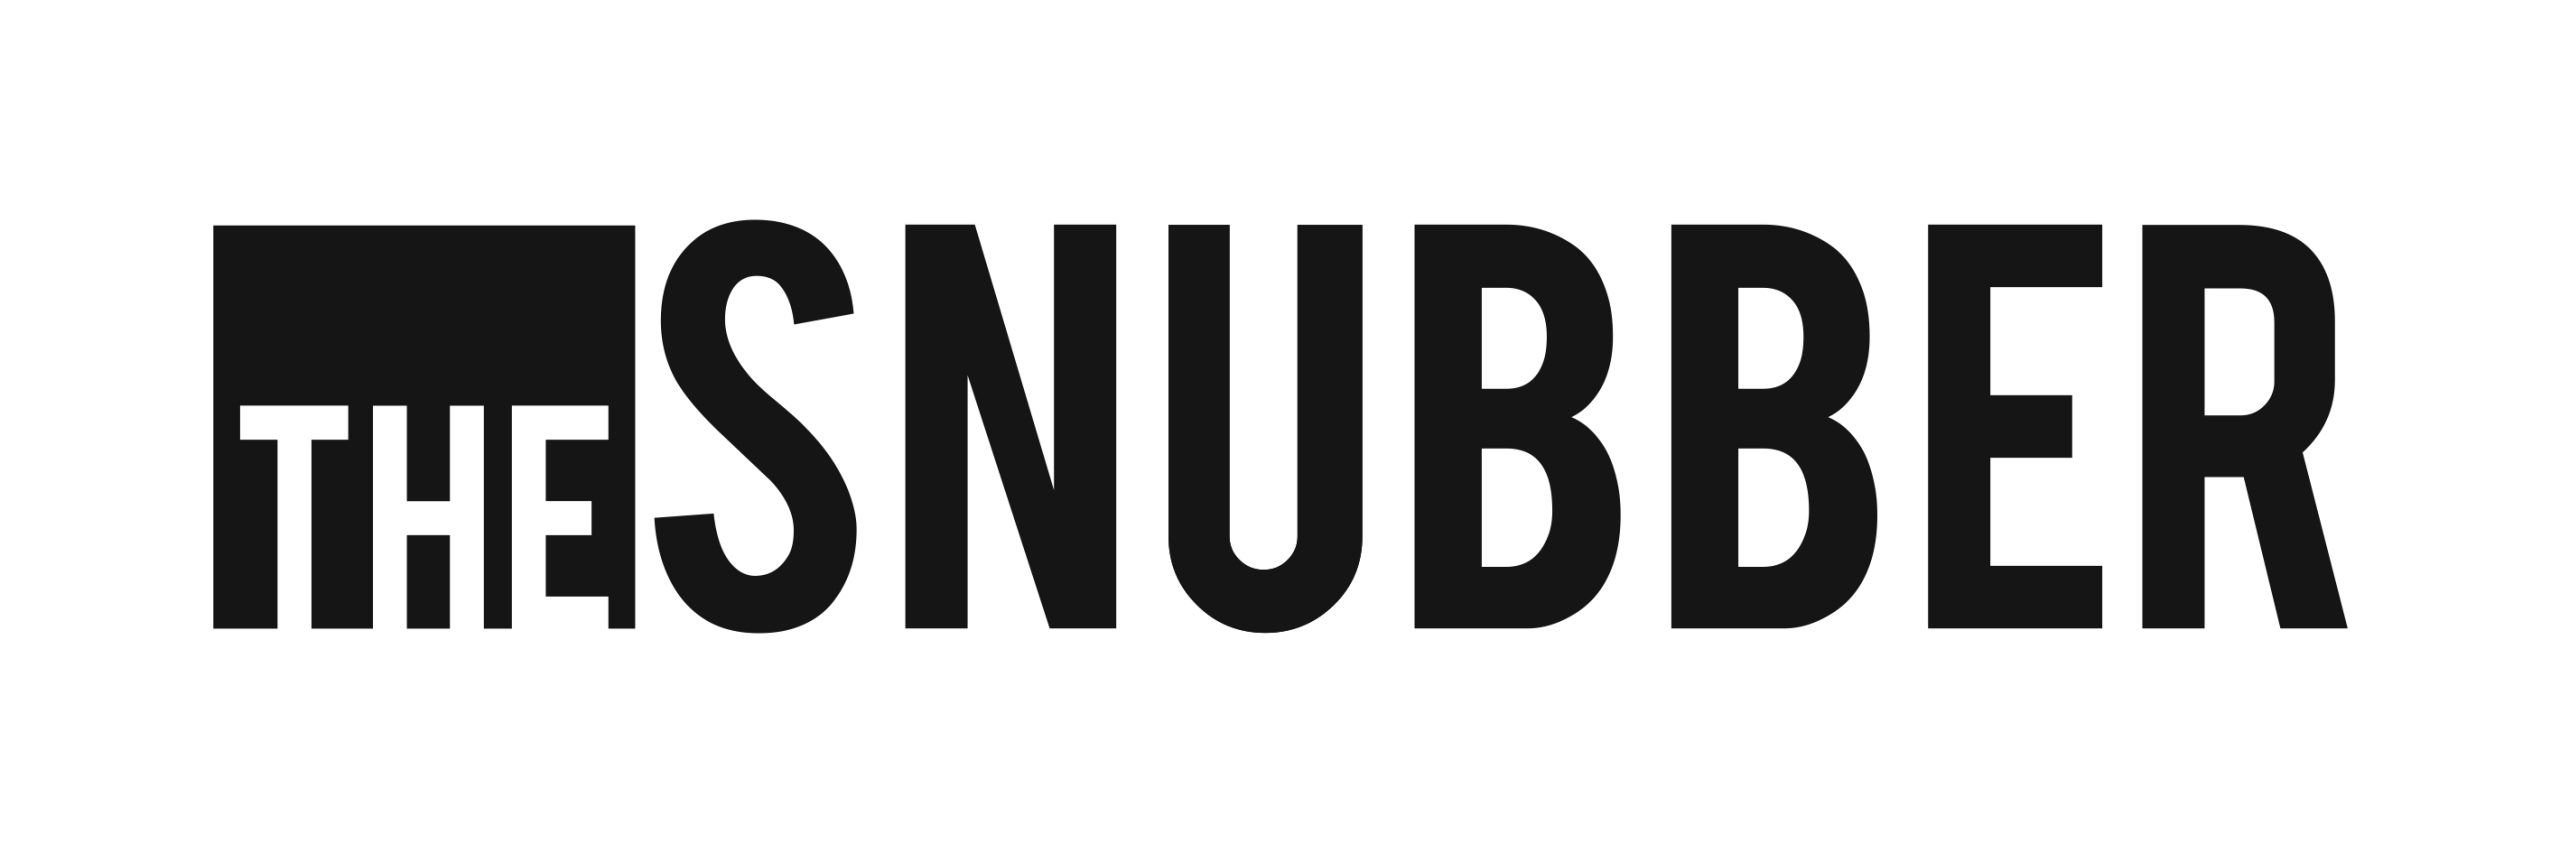 The Snubber